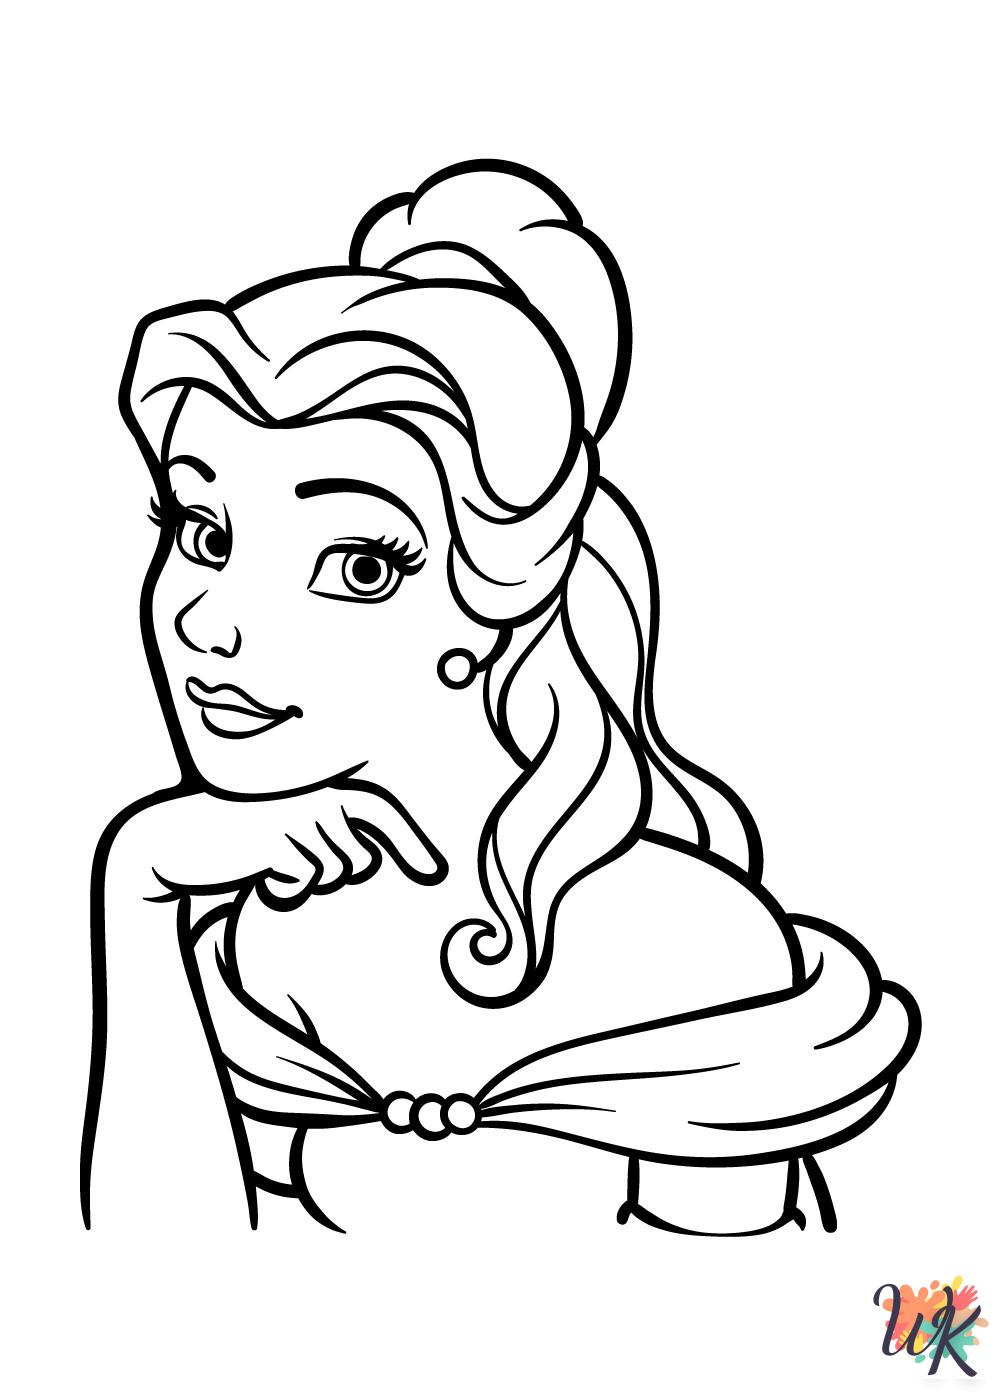 detailed Belle coloring pages for adults